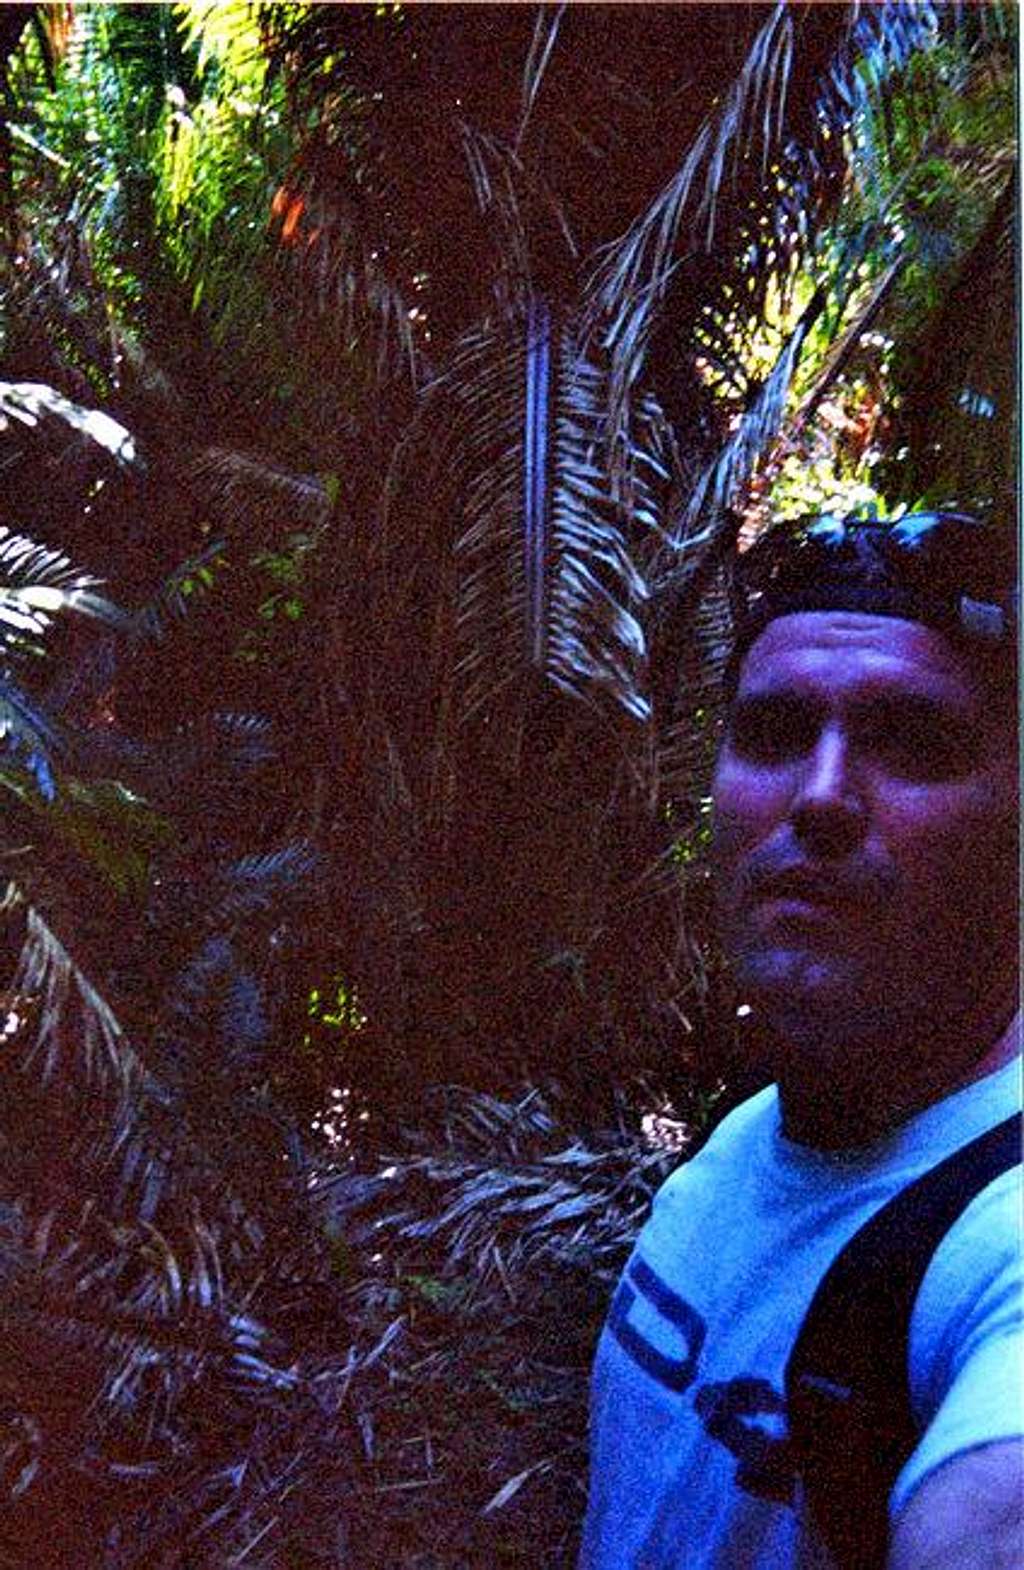 Sweating in the humid jungle,...